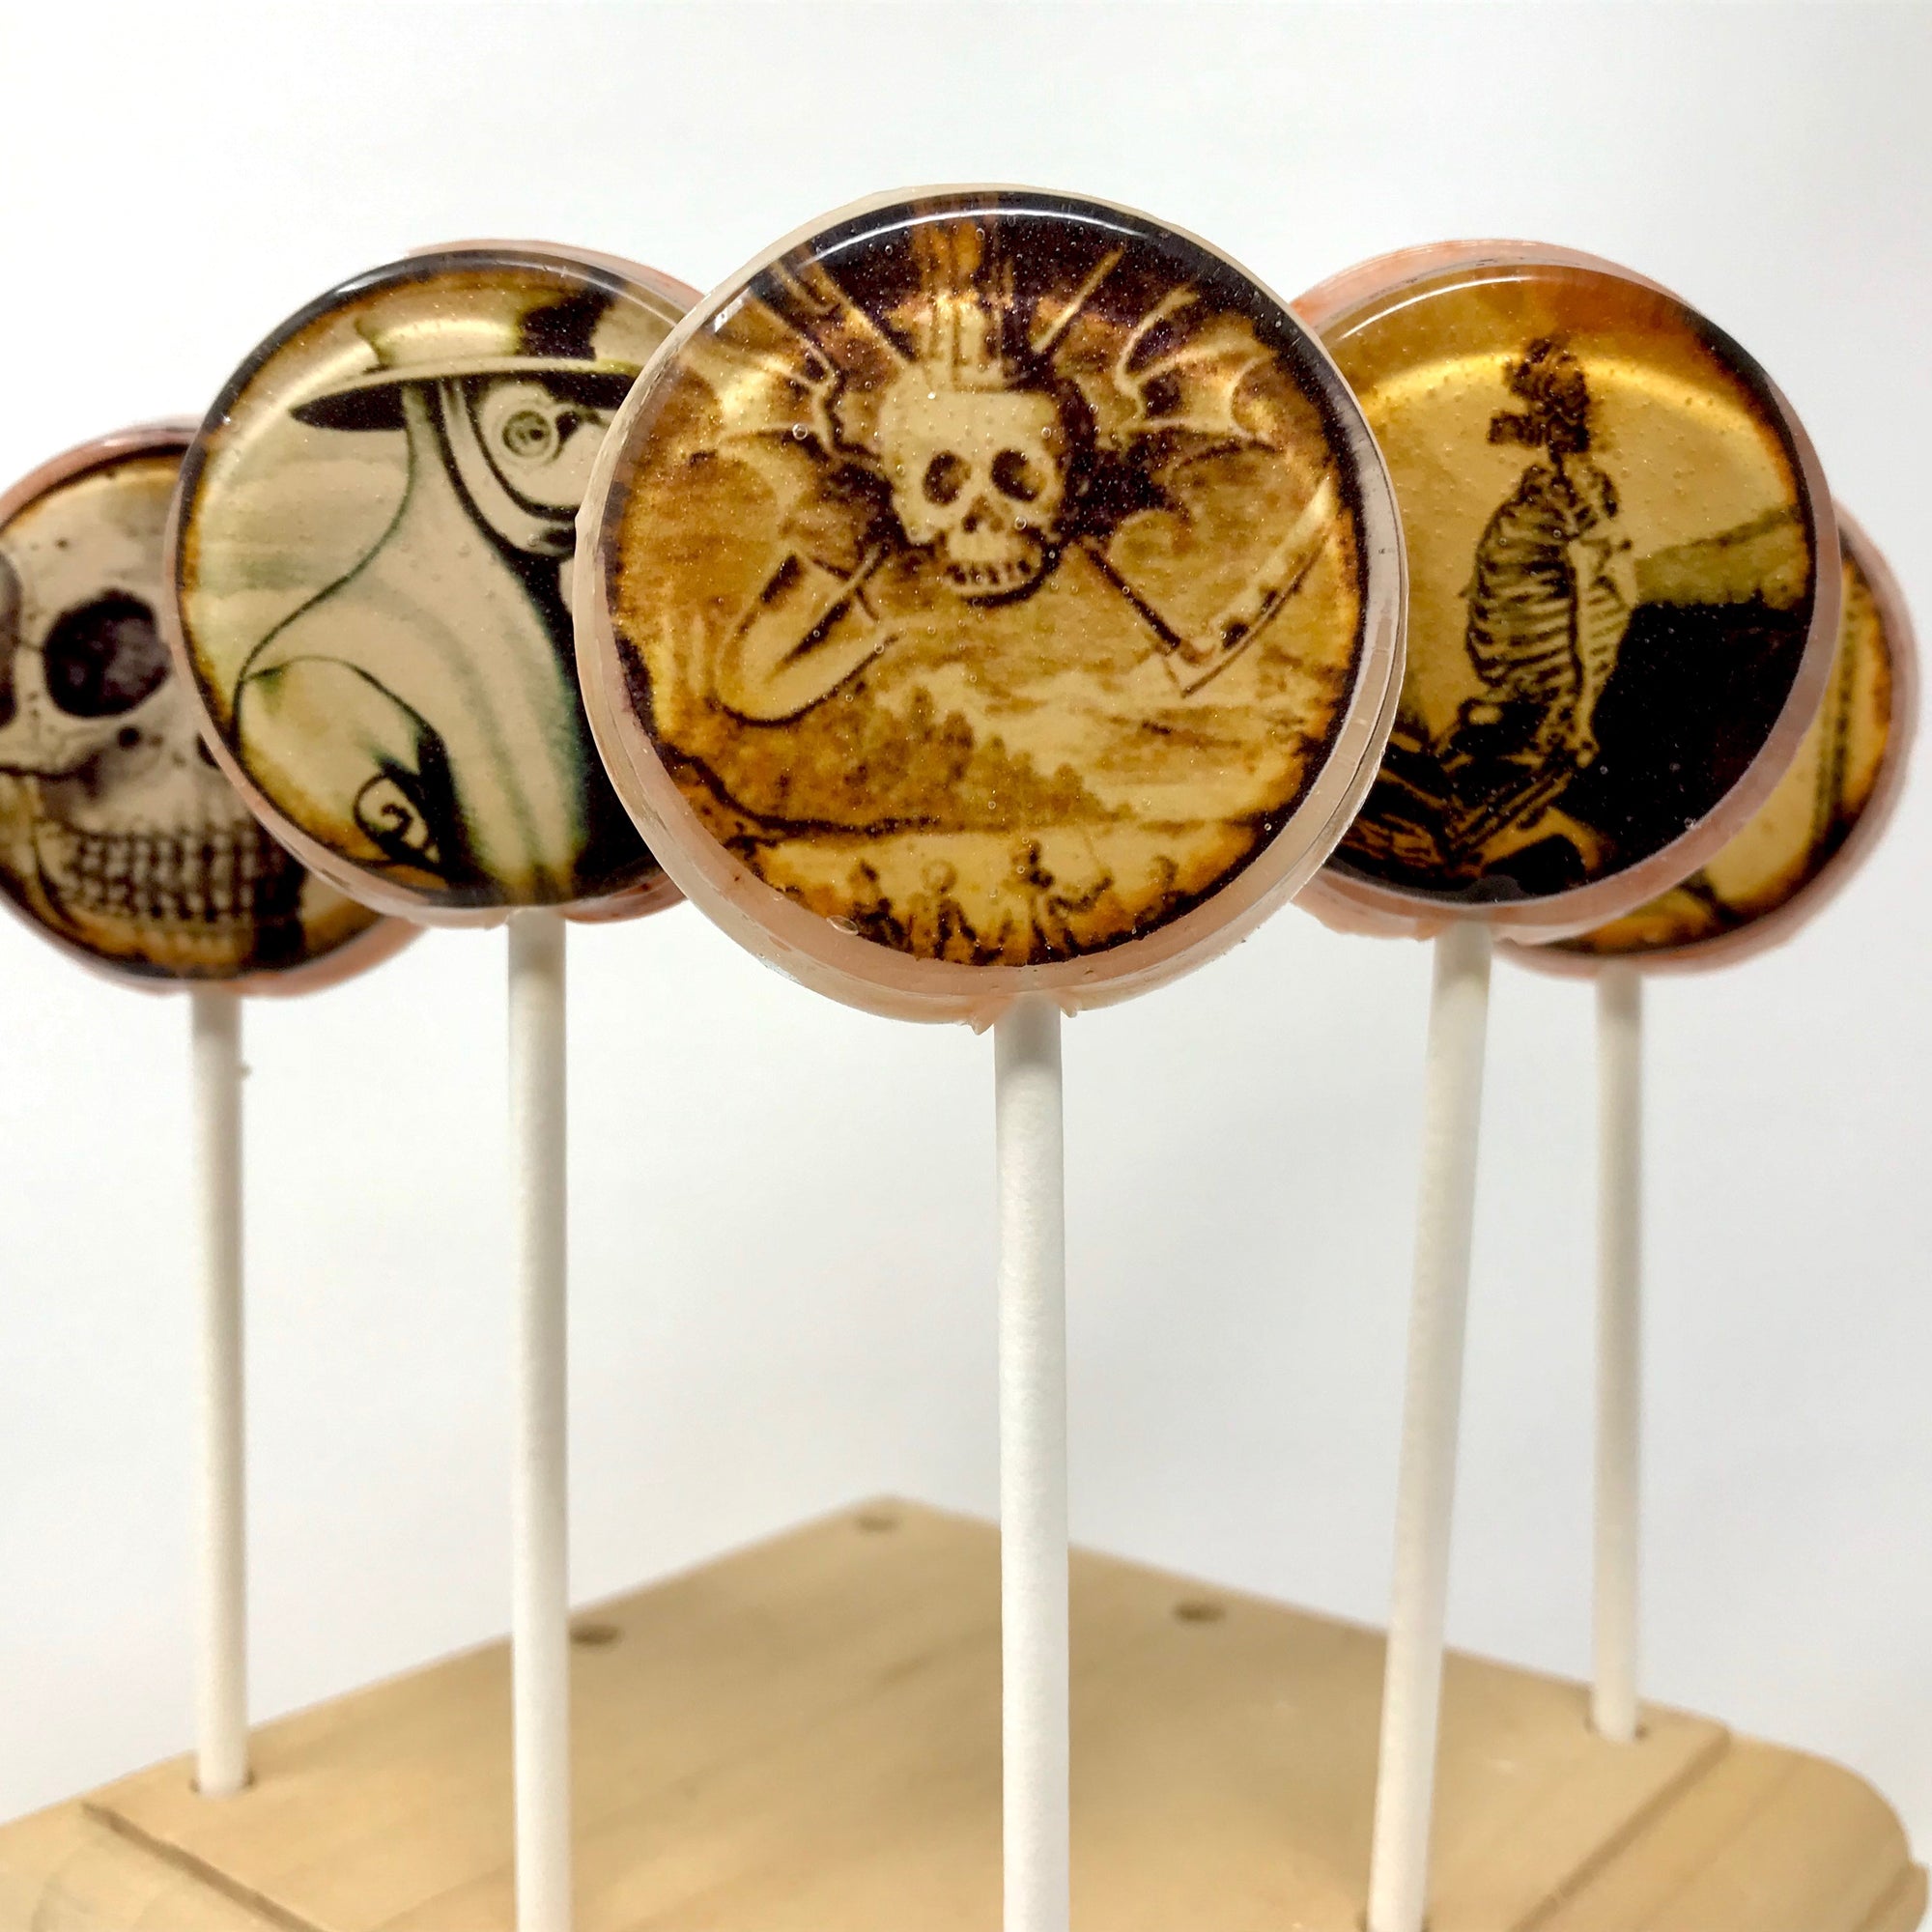 Gruesome Skeleton Lollipops 5-piece set by I Want Candy!